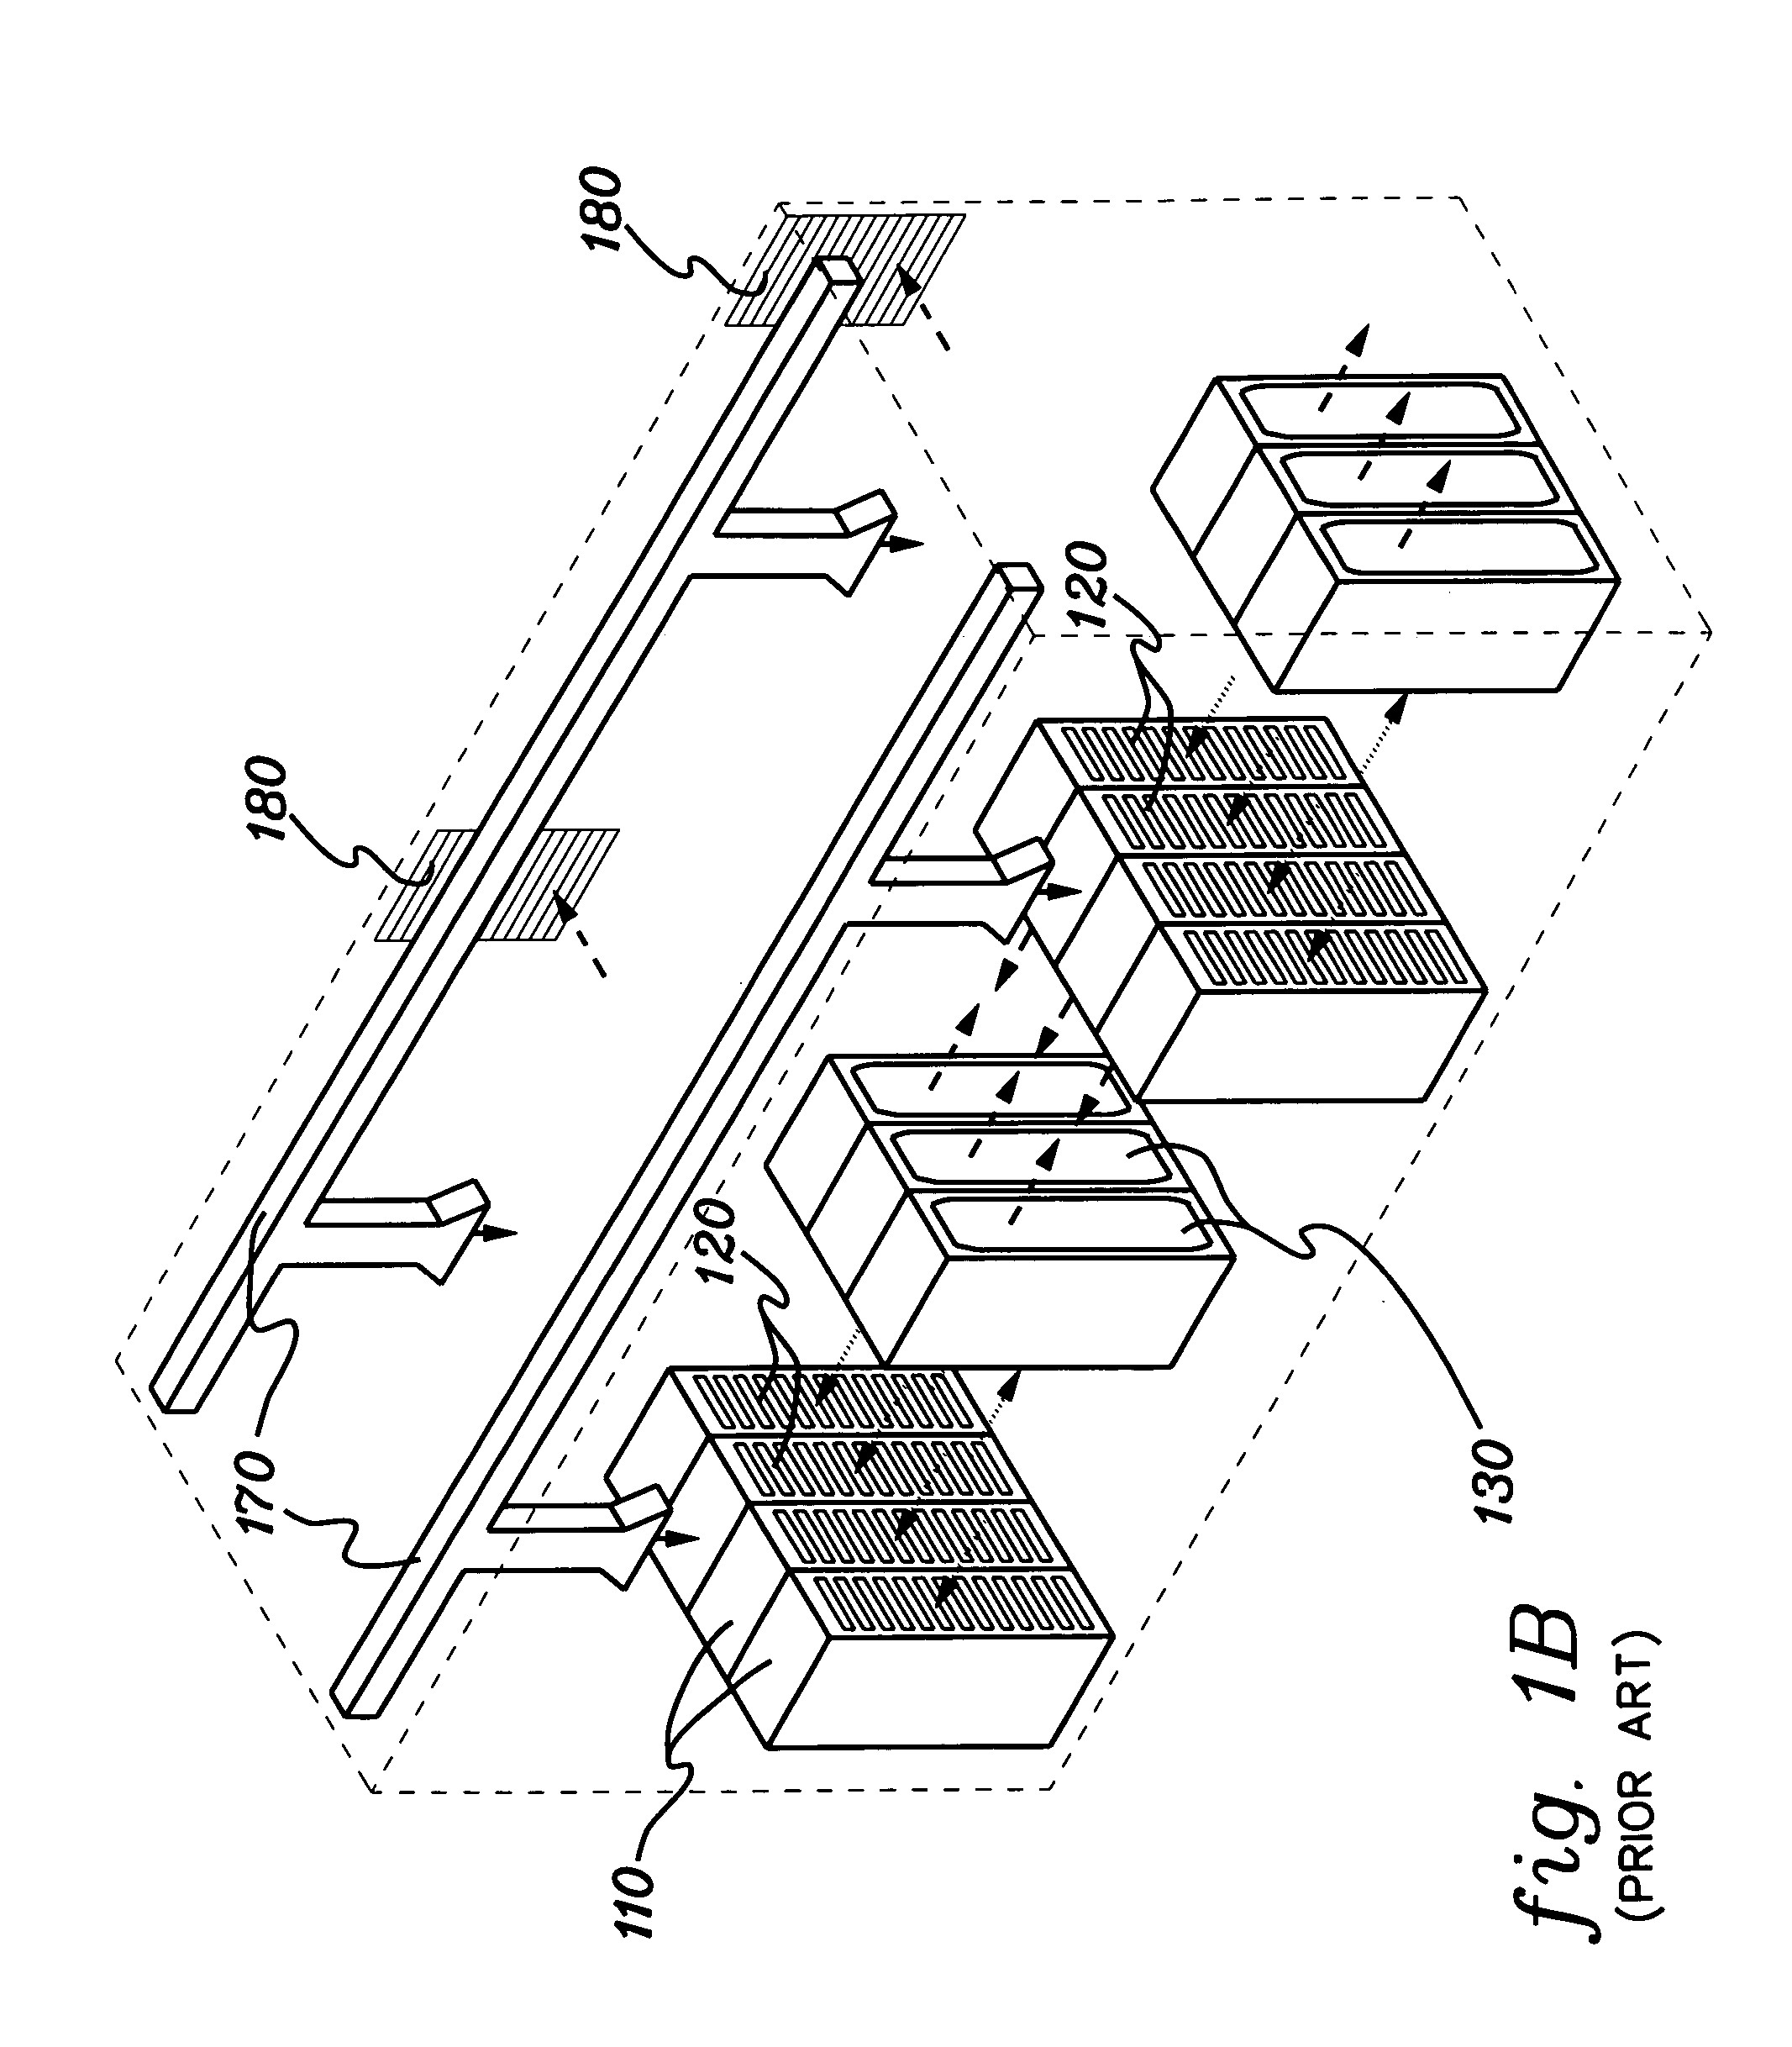 Apparatus and method for facilitating cooling of an electronics rack employing a closed loop heat exchange system